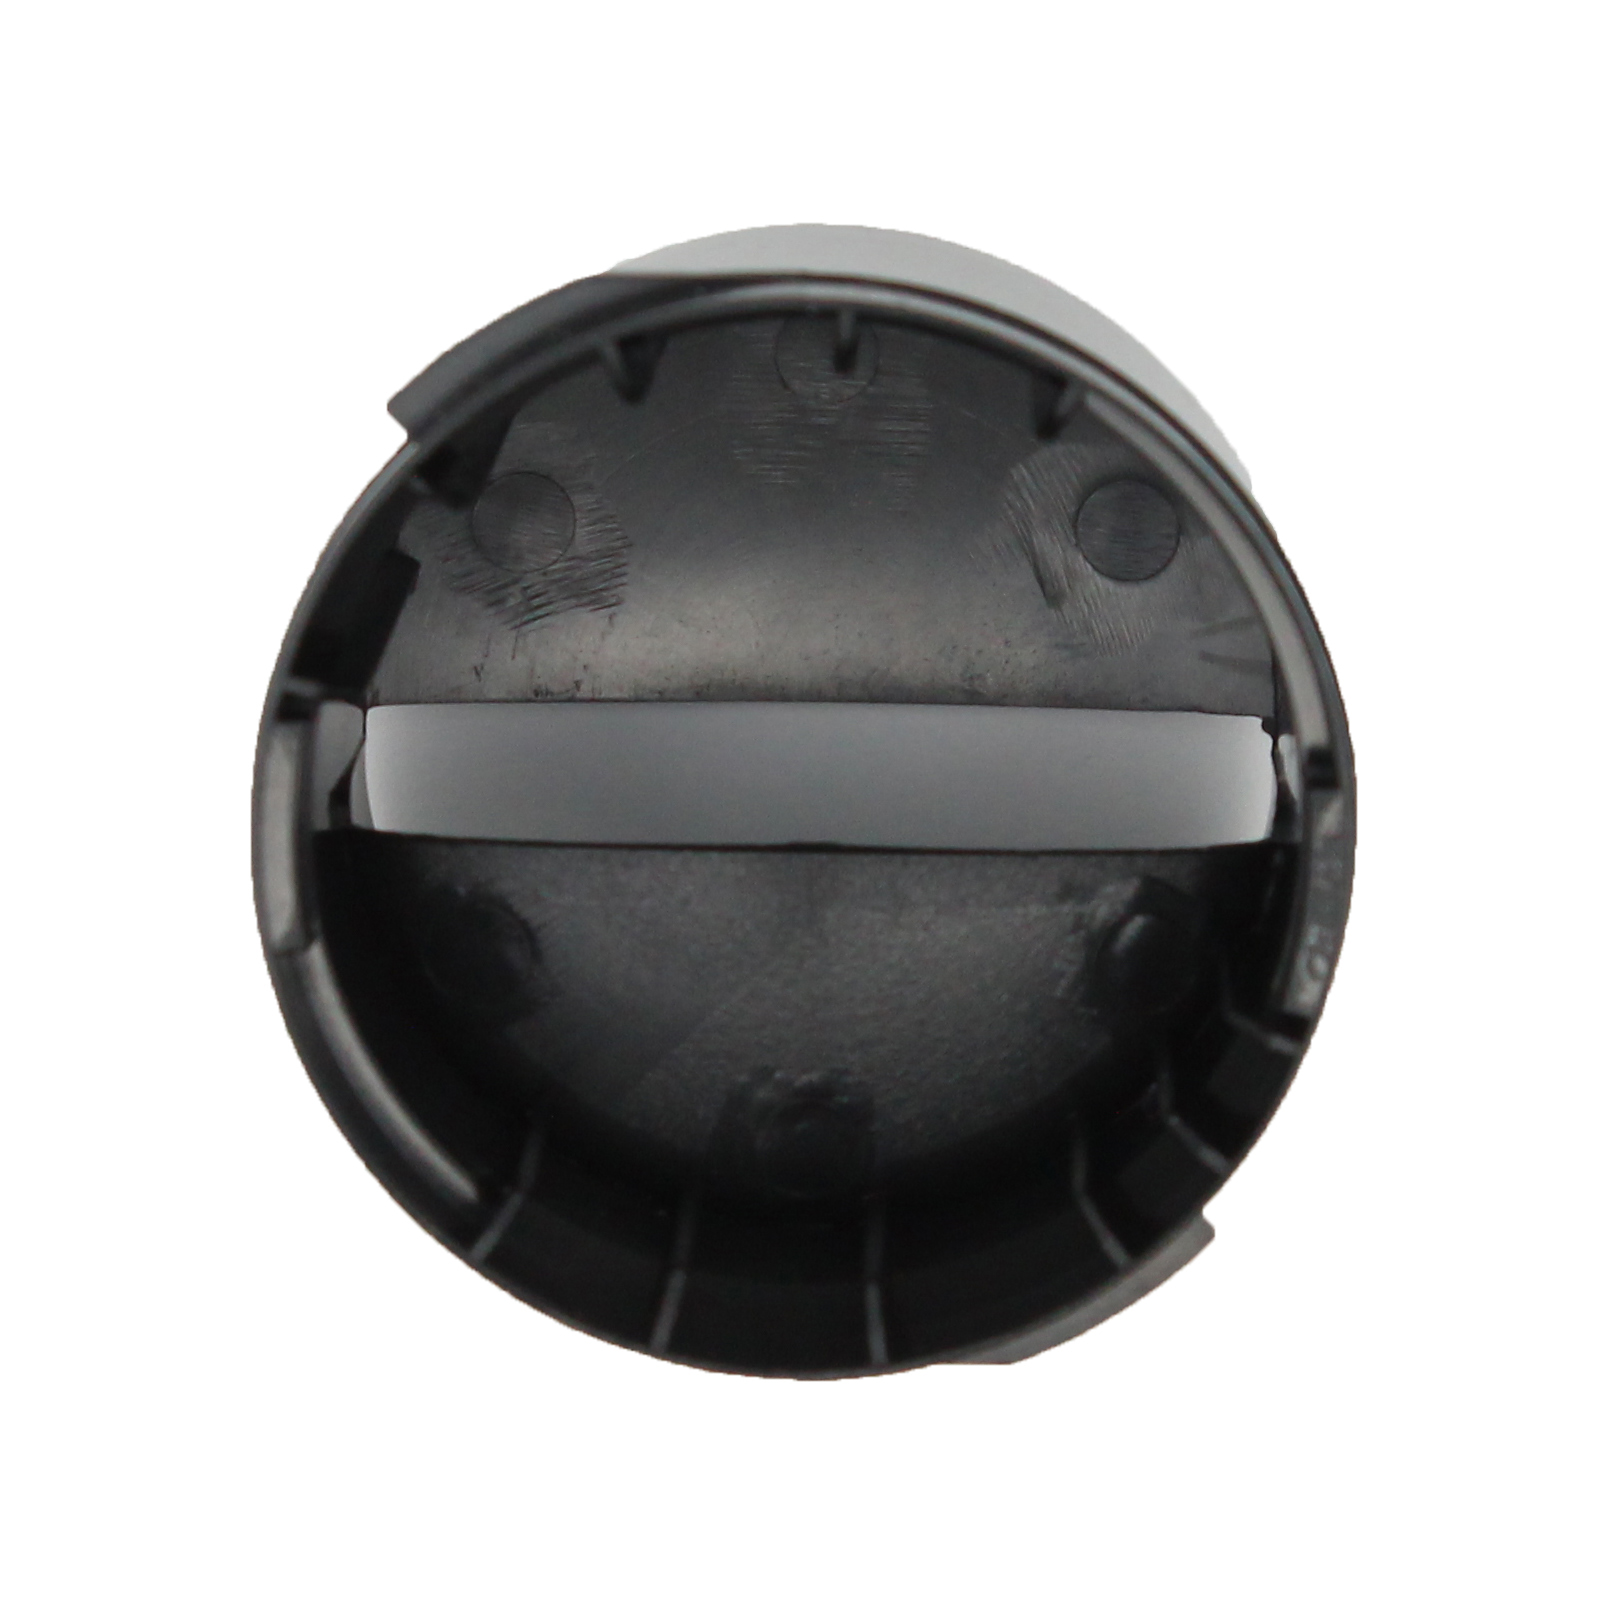 2260502B Refrigerator Water Filter Cap Replacement for Whirlpool ED5HVAXVL01 Refrigerator - Compatible with WP2260518B Black Water Filter Cap - UpStart Components Brand - image 2 of 4